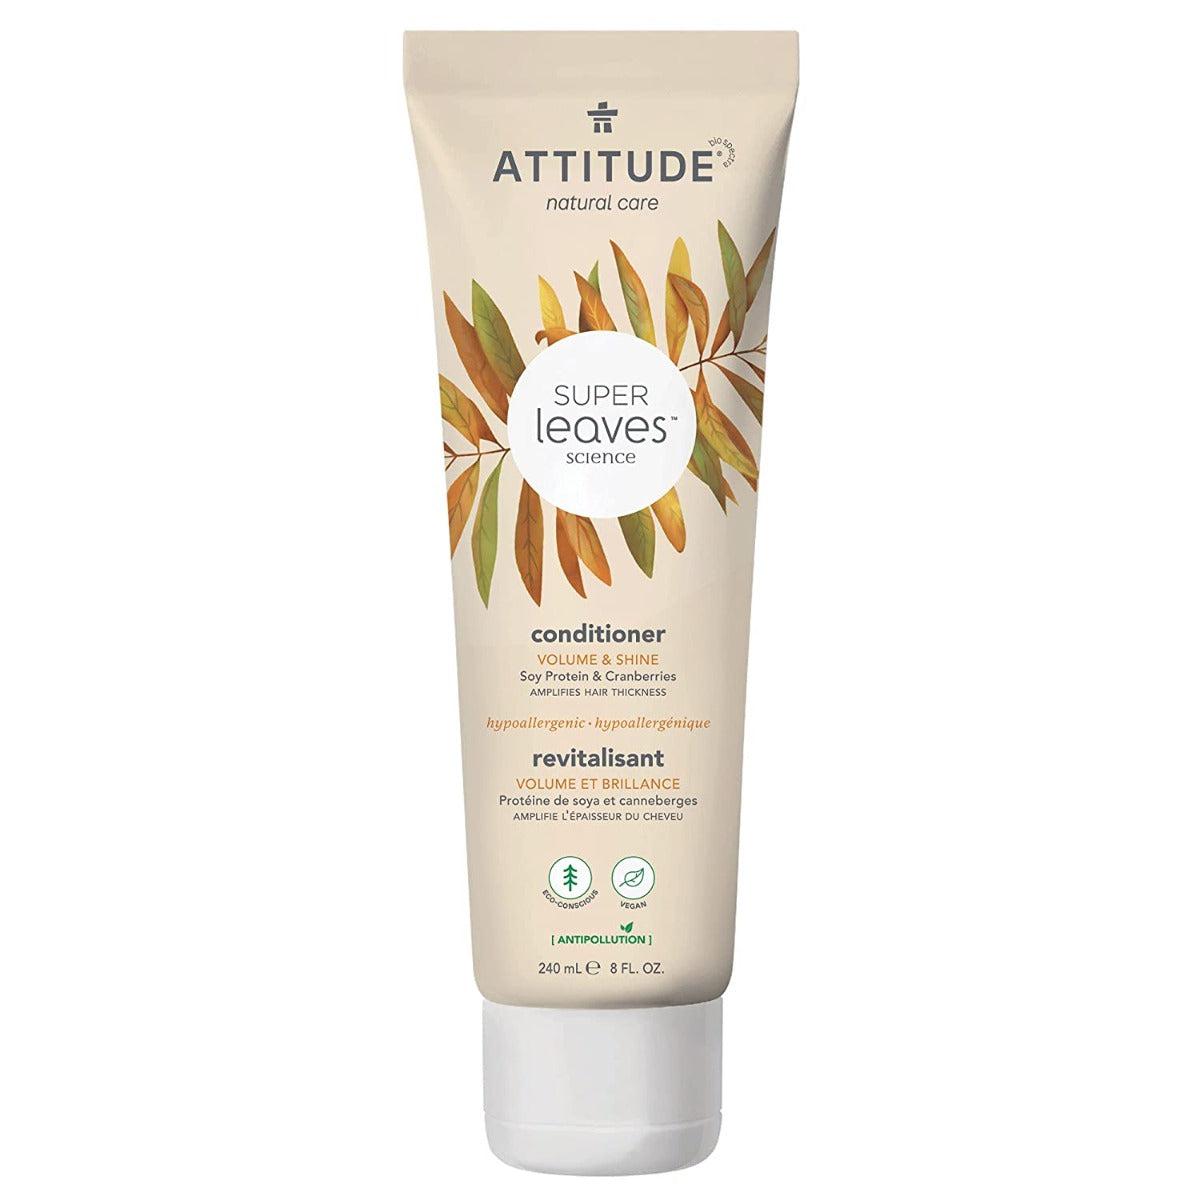 Attitude Natural Care Super Leaves Conditioner Volume & Shine Soy Protein & Cranberries 240ml